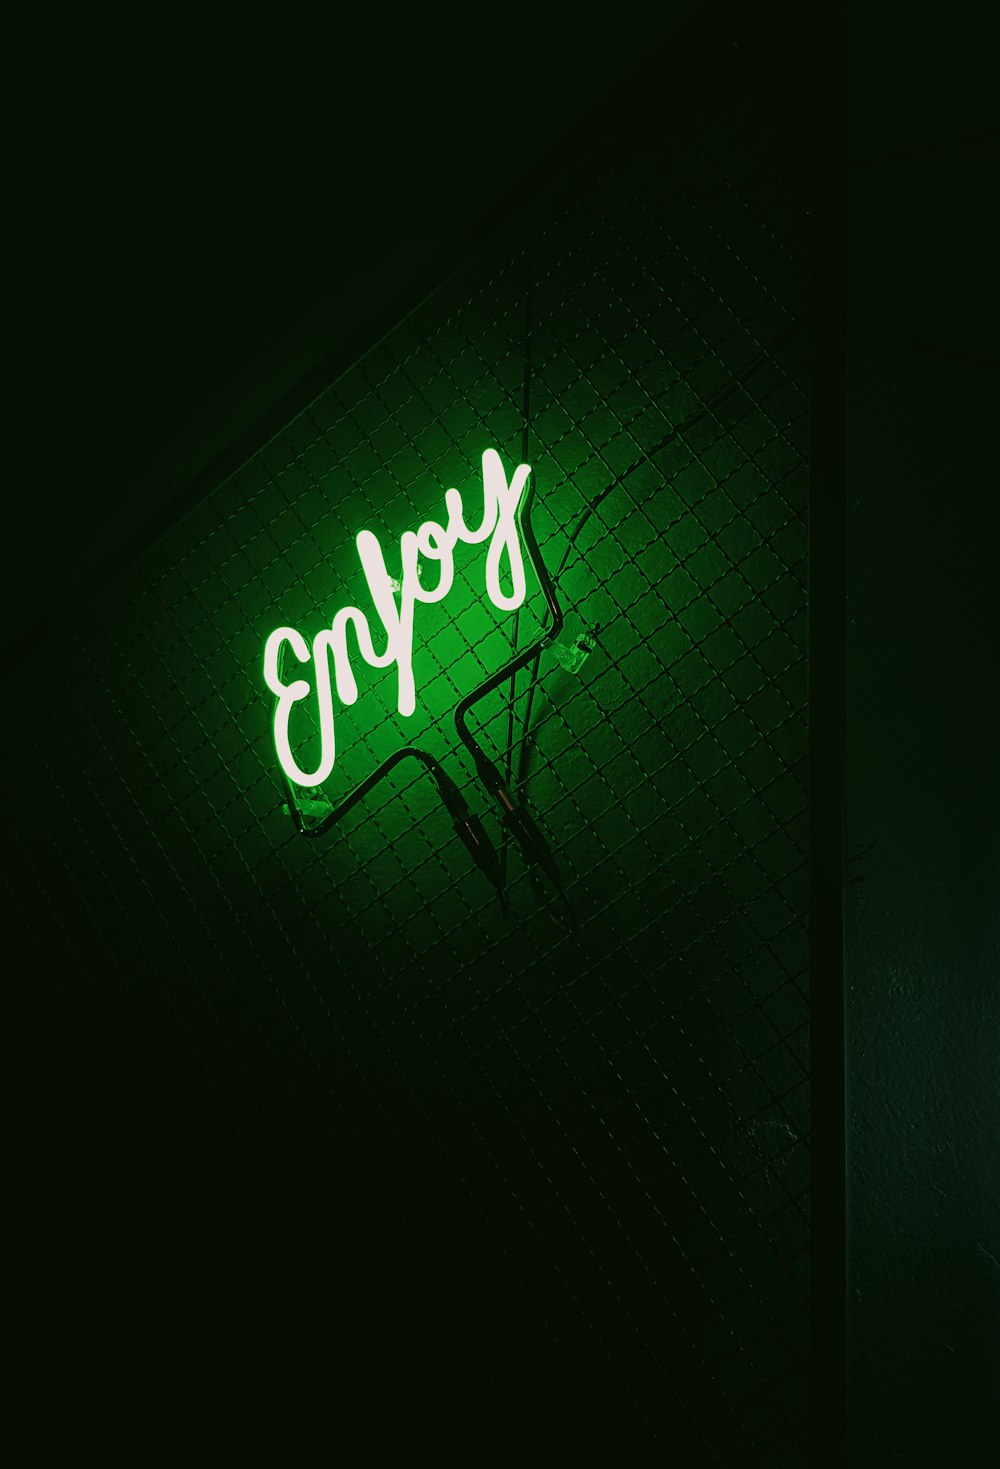 Neon Green Pictures | Download Free Images on Unsplash